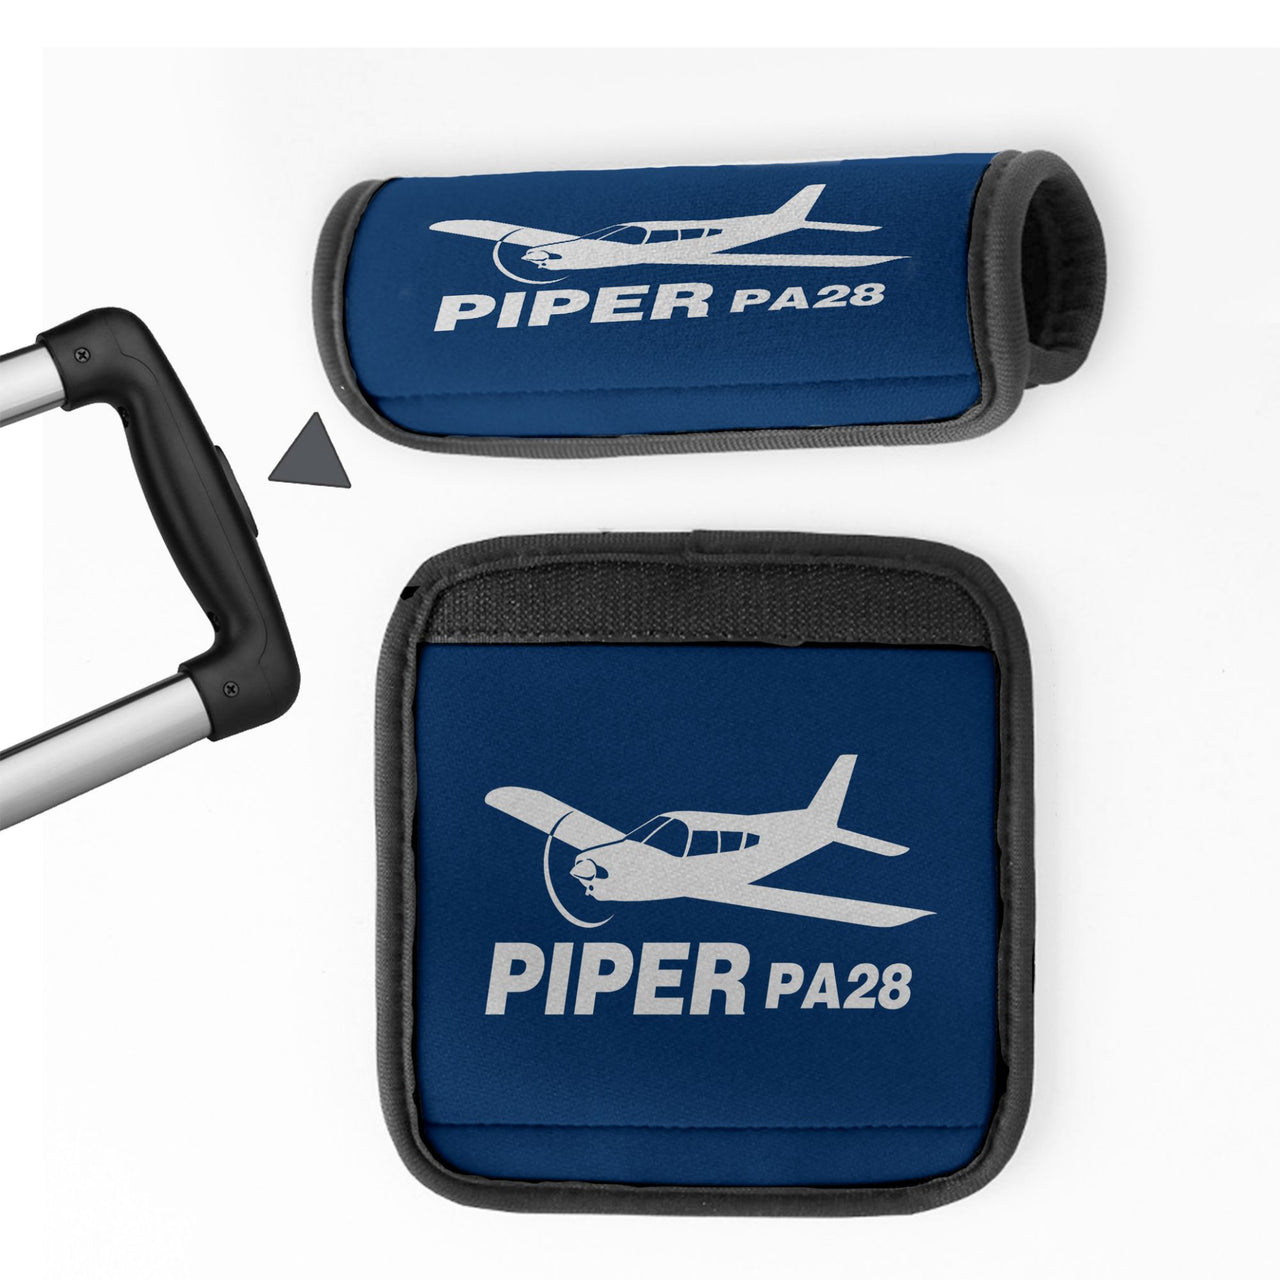 The Piper PA28 Designed Neoprene Luggage Handle Covers